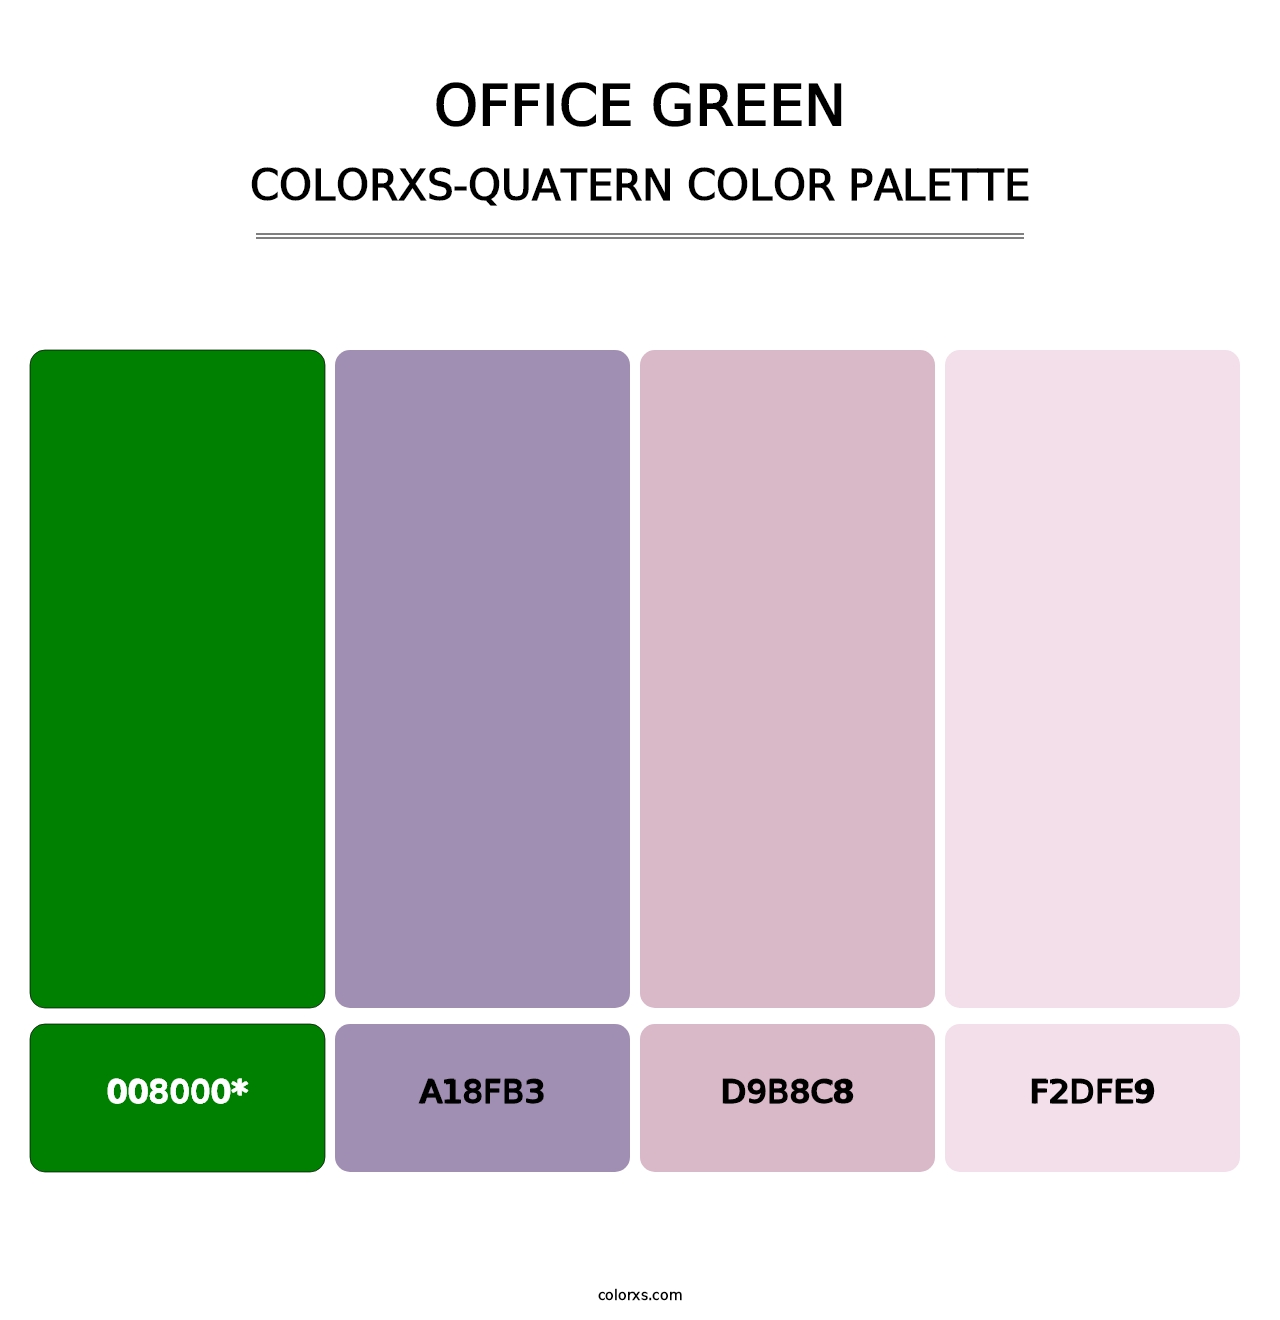 Office Green - Colorxs Quatern Palette